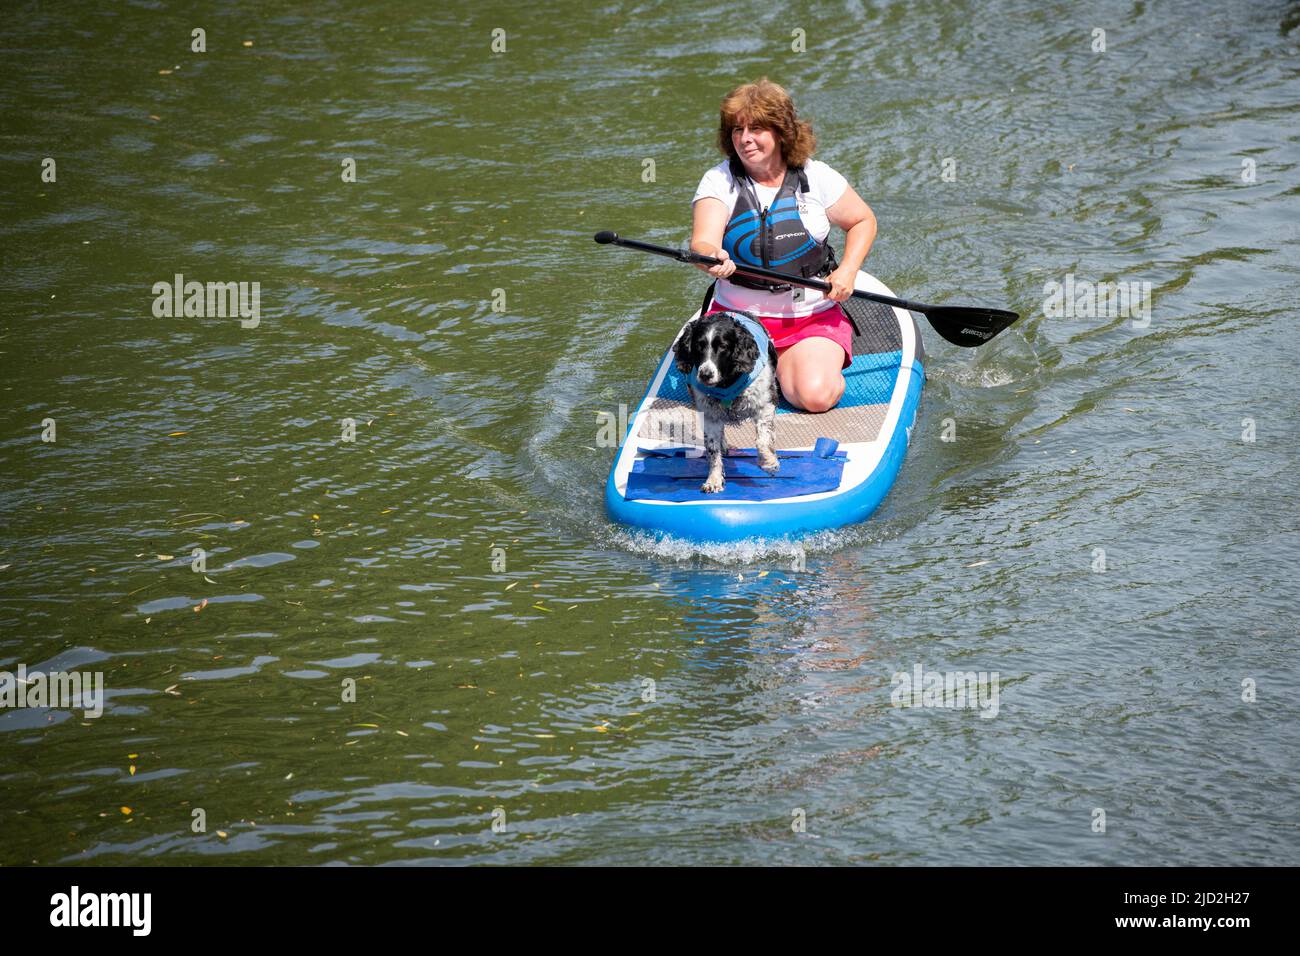 Cambridge, UK. 17th June, 2022. A woman and a dog keep cool in the sunny hot weather on a paddle board on the River Cam. Today is expected to be the hottest day of the year in the UK so far and temperatures are expected to rise above 30c in the heatwave. Credit: Julian Eales/Alamy Live News Stock Photo